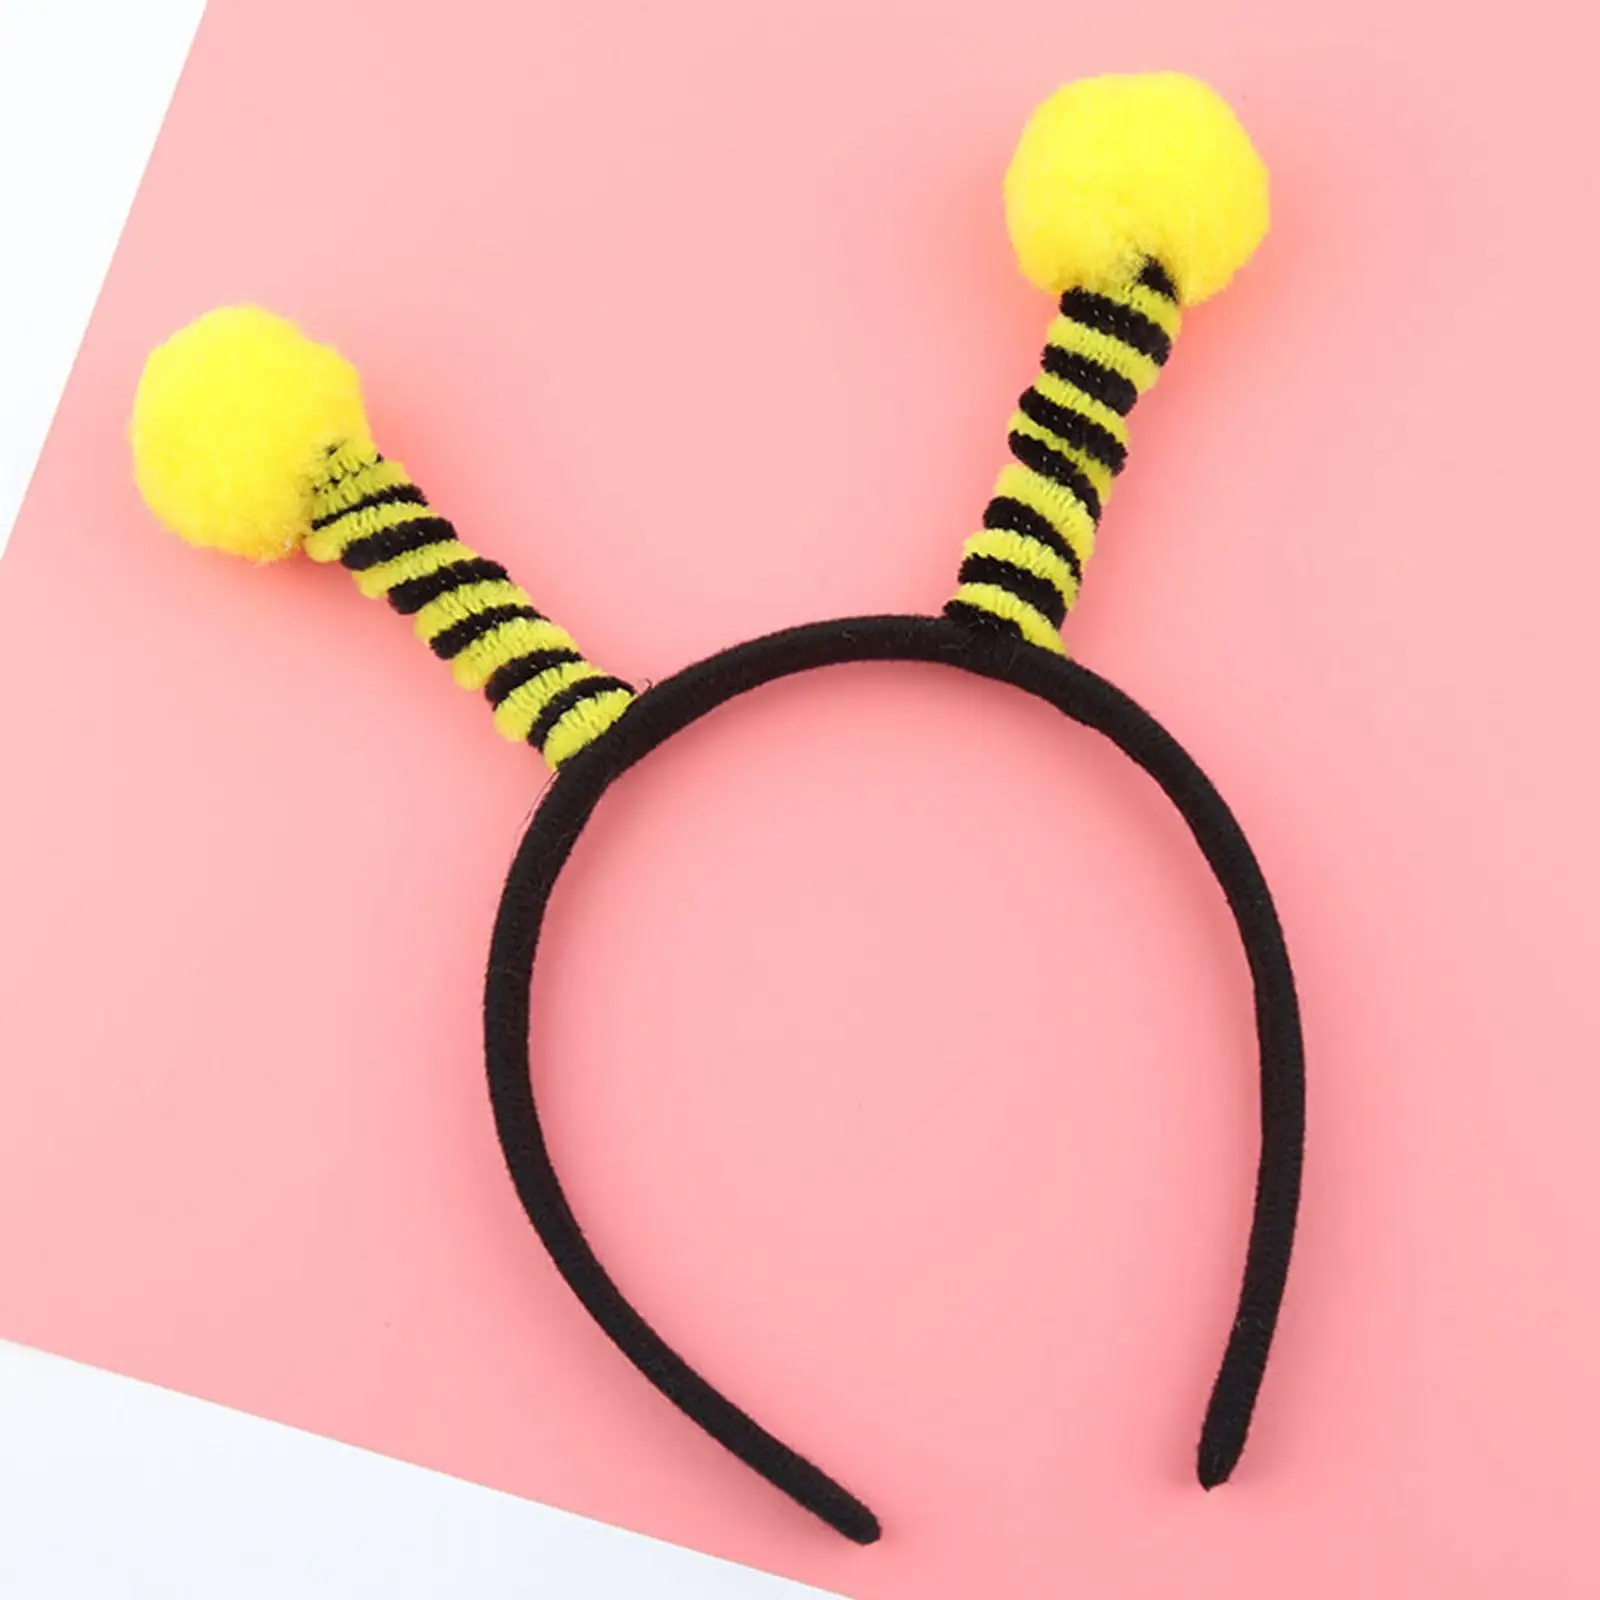 Hair Band Tentacle Decoration Animal Shape Cute Accessory Dress up for Party Supplies Birthday Party Favors Cosplay Adult Women